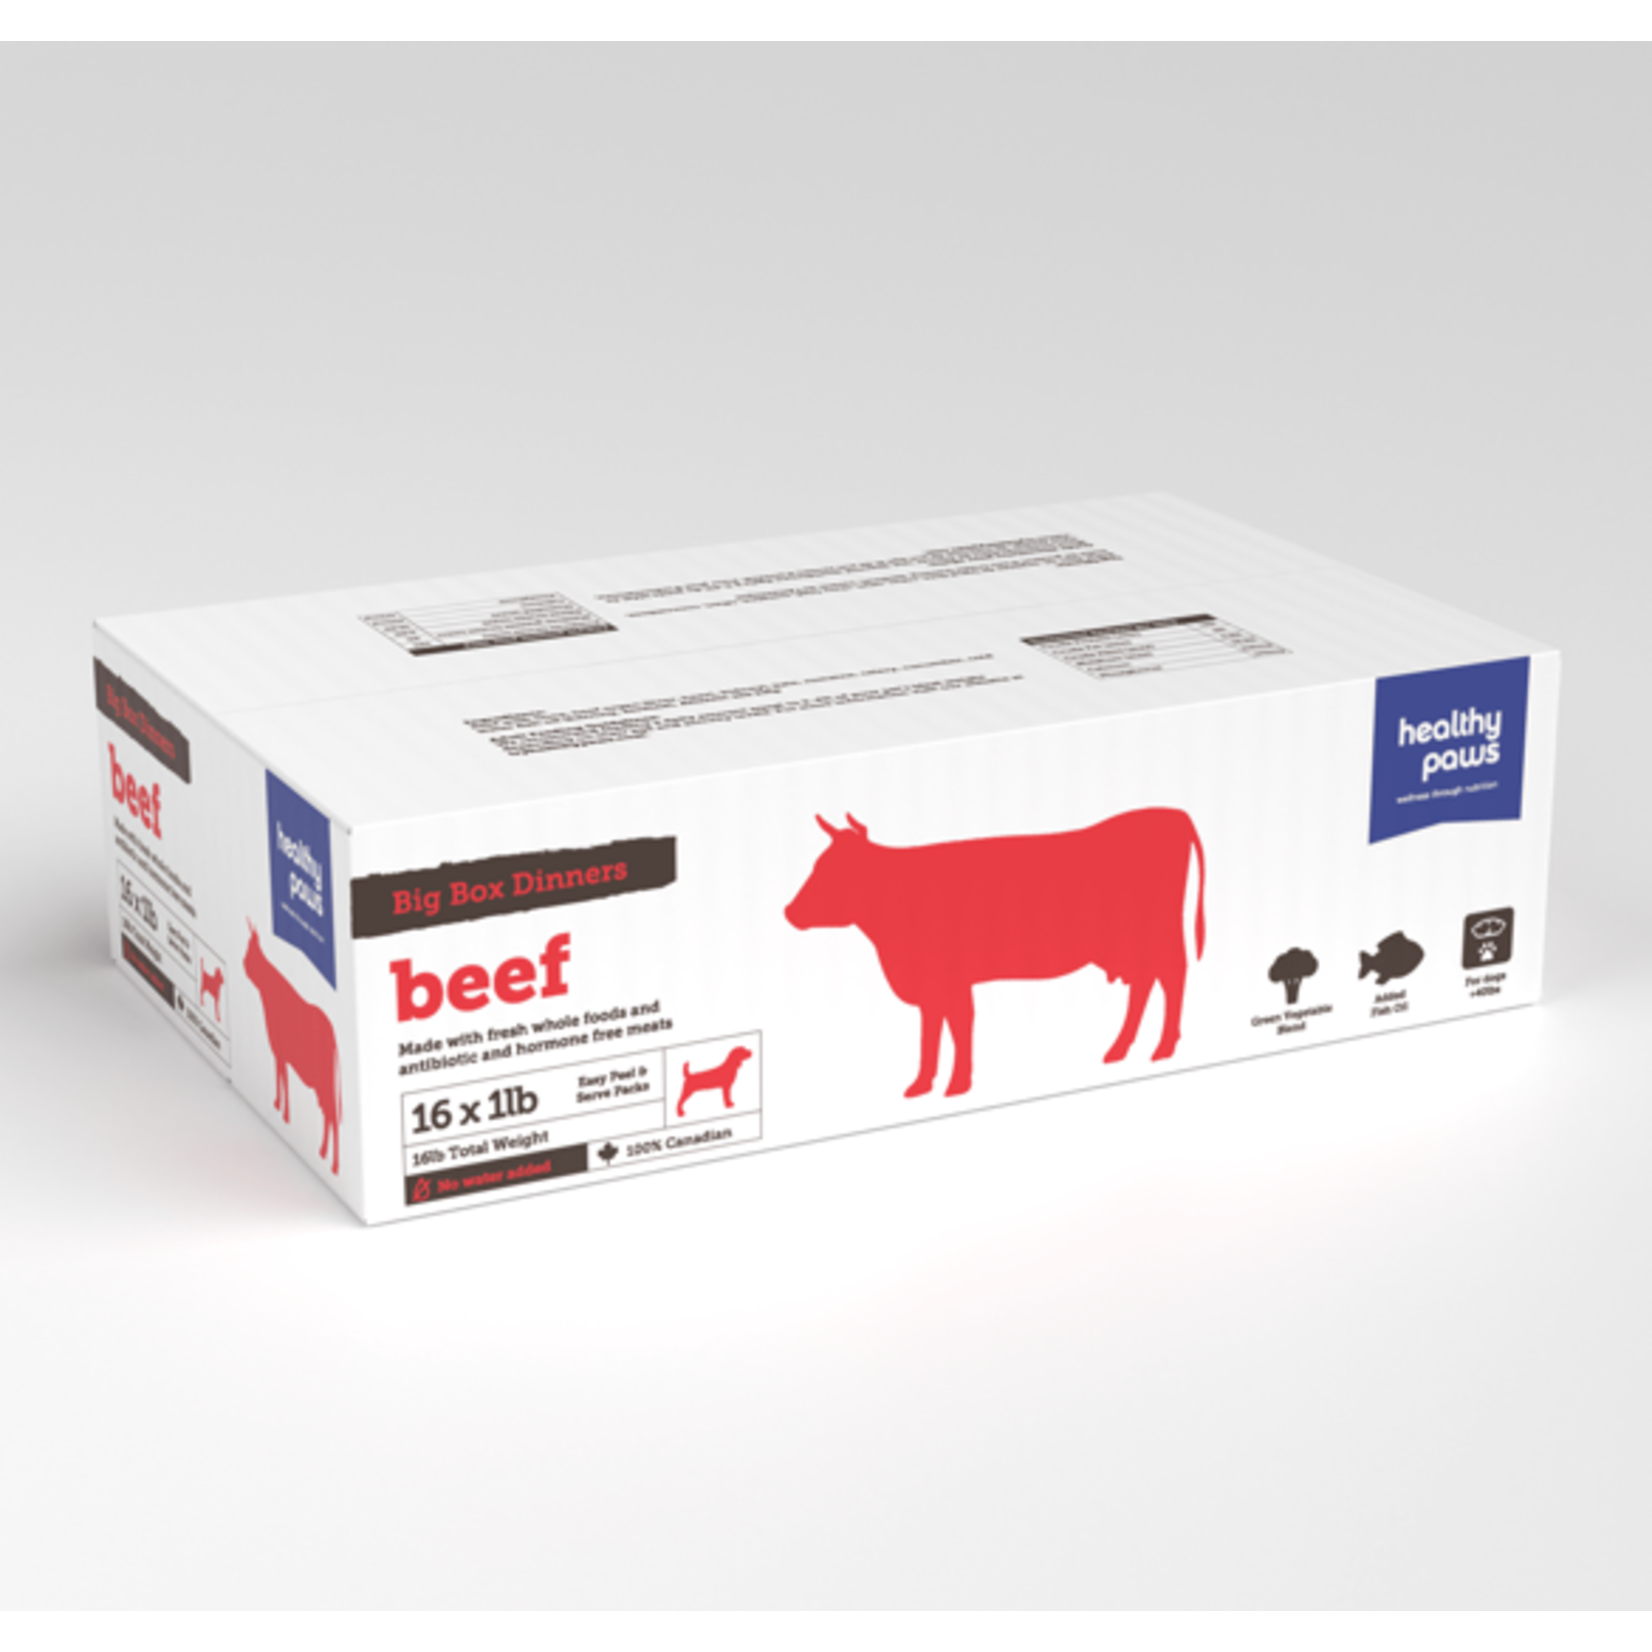 HEALTY PAWS (W) Healthy Paws Big Box Dinner Beef and Veg 16 x 1 lb